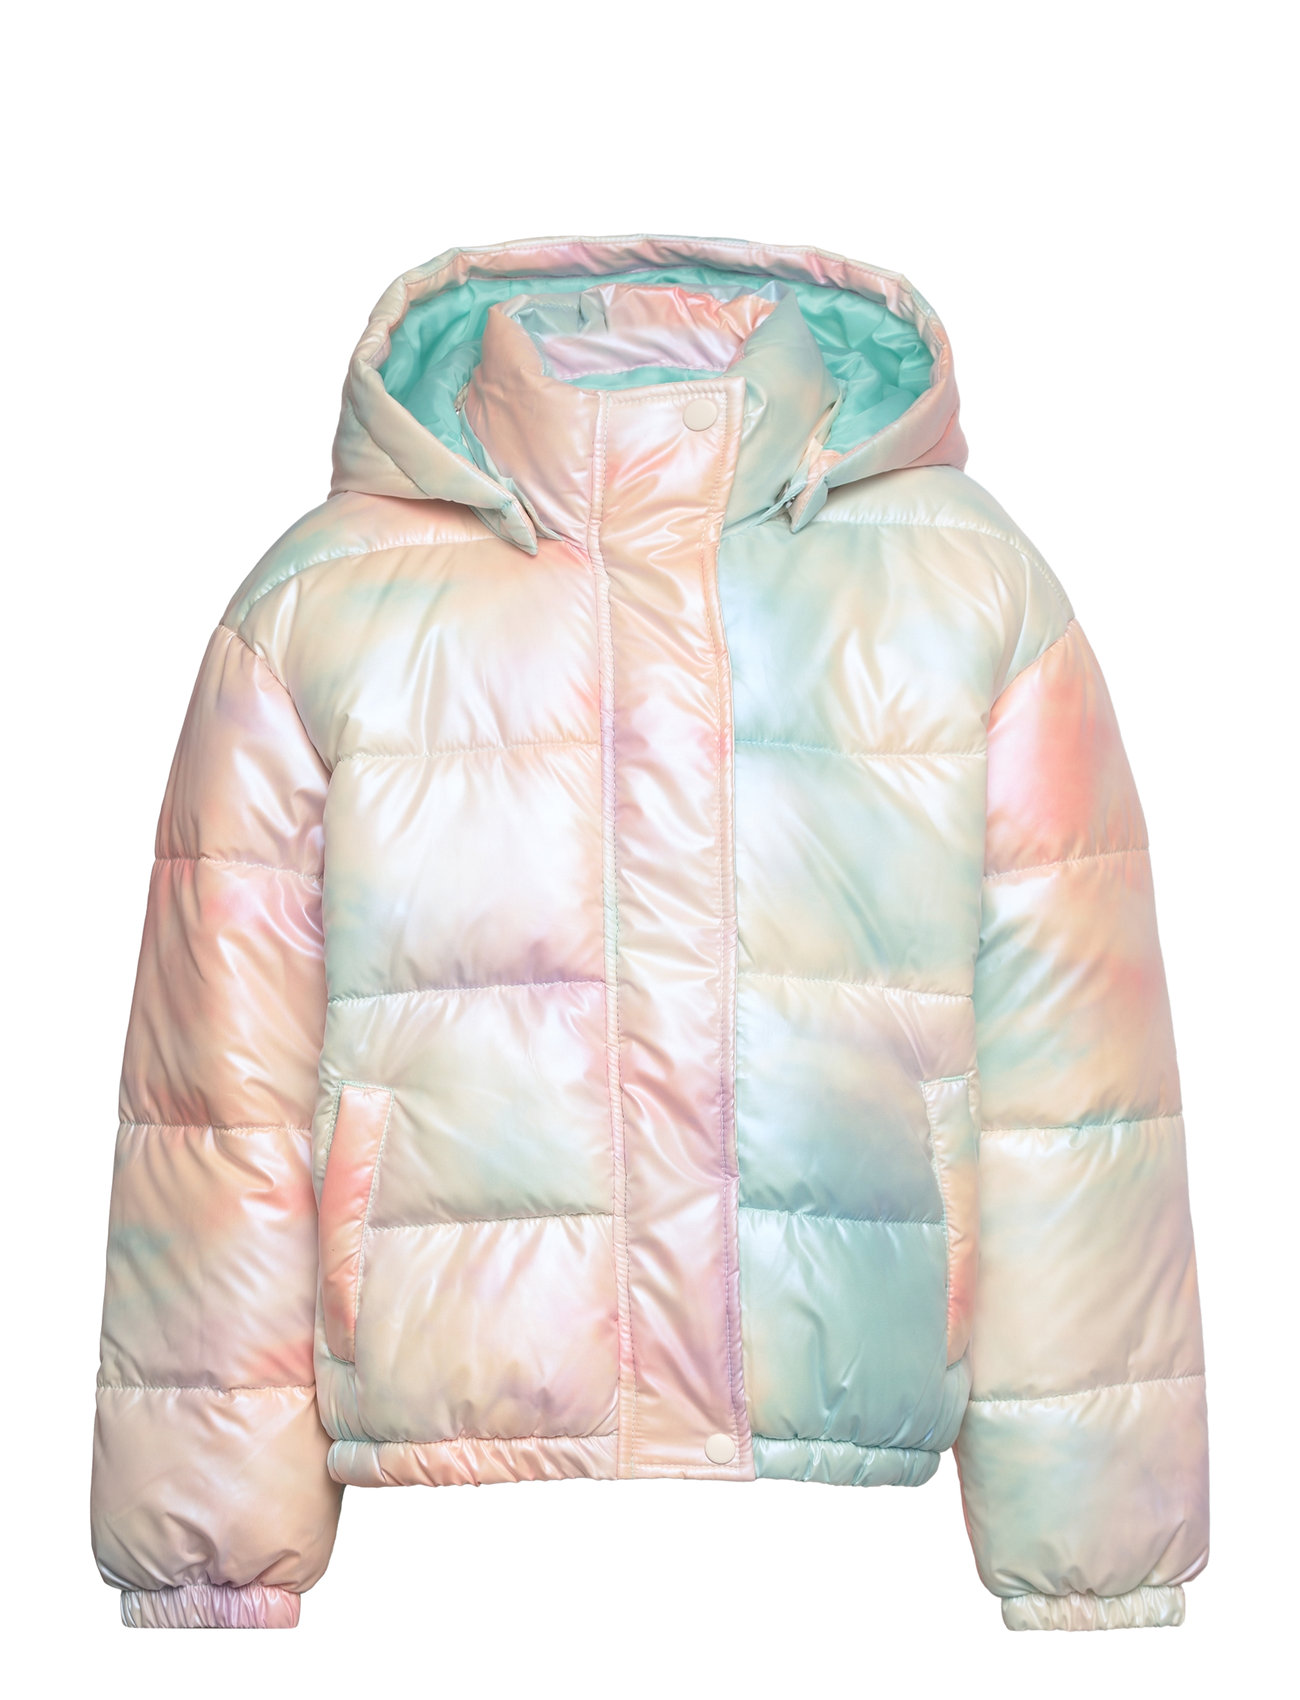 name it Nkfmash Puffer Jacket name & Puffer Padded Fast Buy 31.50 Boozt.com. at delivery and - online €. easy from returns it